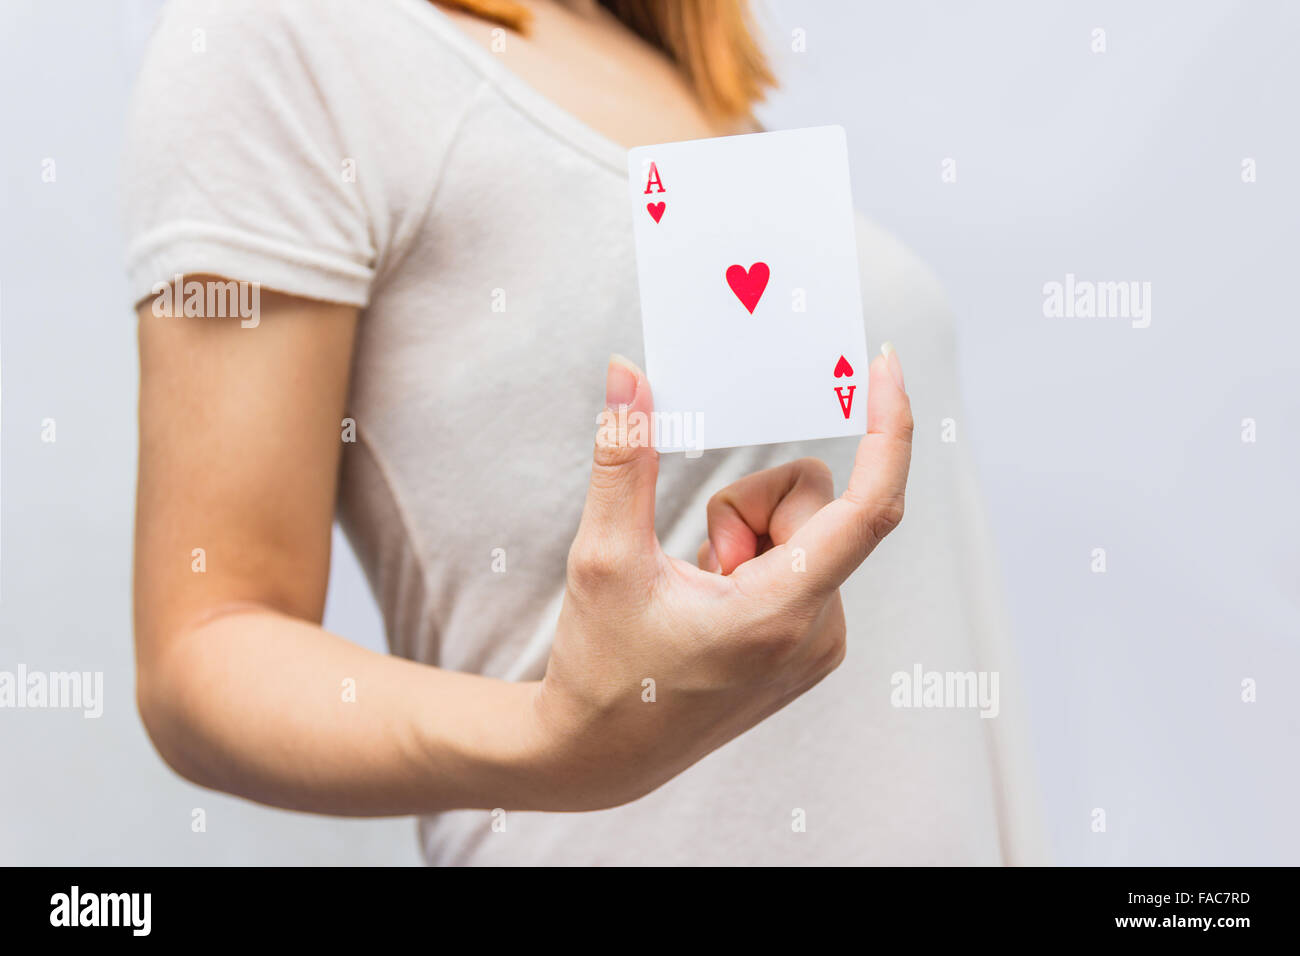 young woman holding in hand poker card with combination of Full House. in focus hand and poker card. Stock Photo